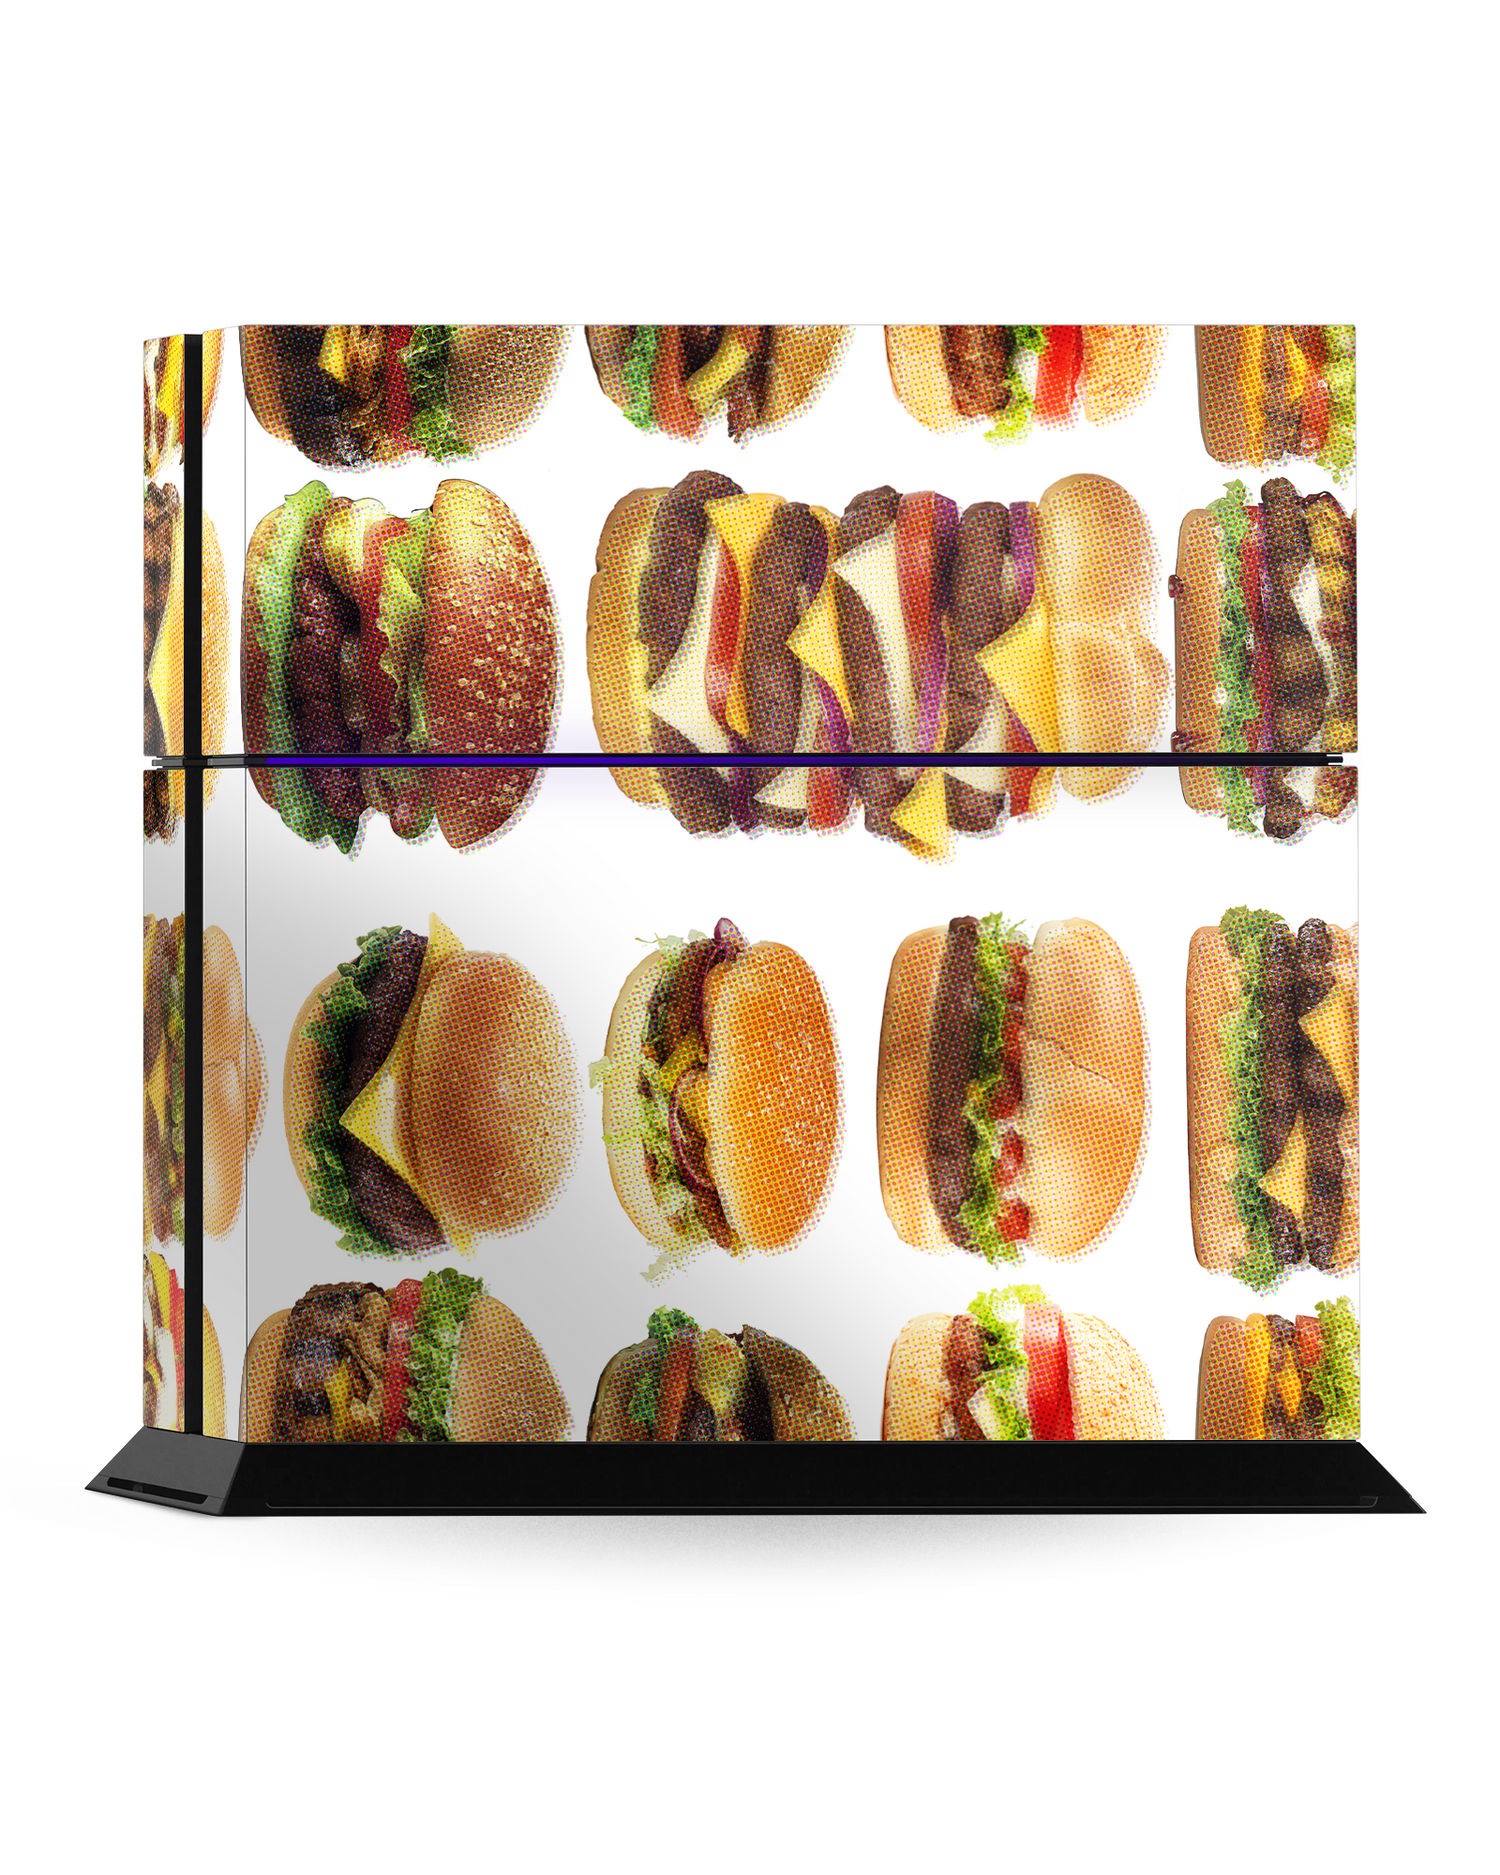 Burger Time Console Skin for Sony PlayStation 4: Standing